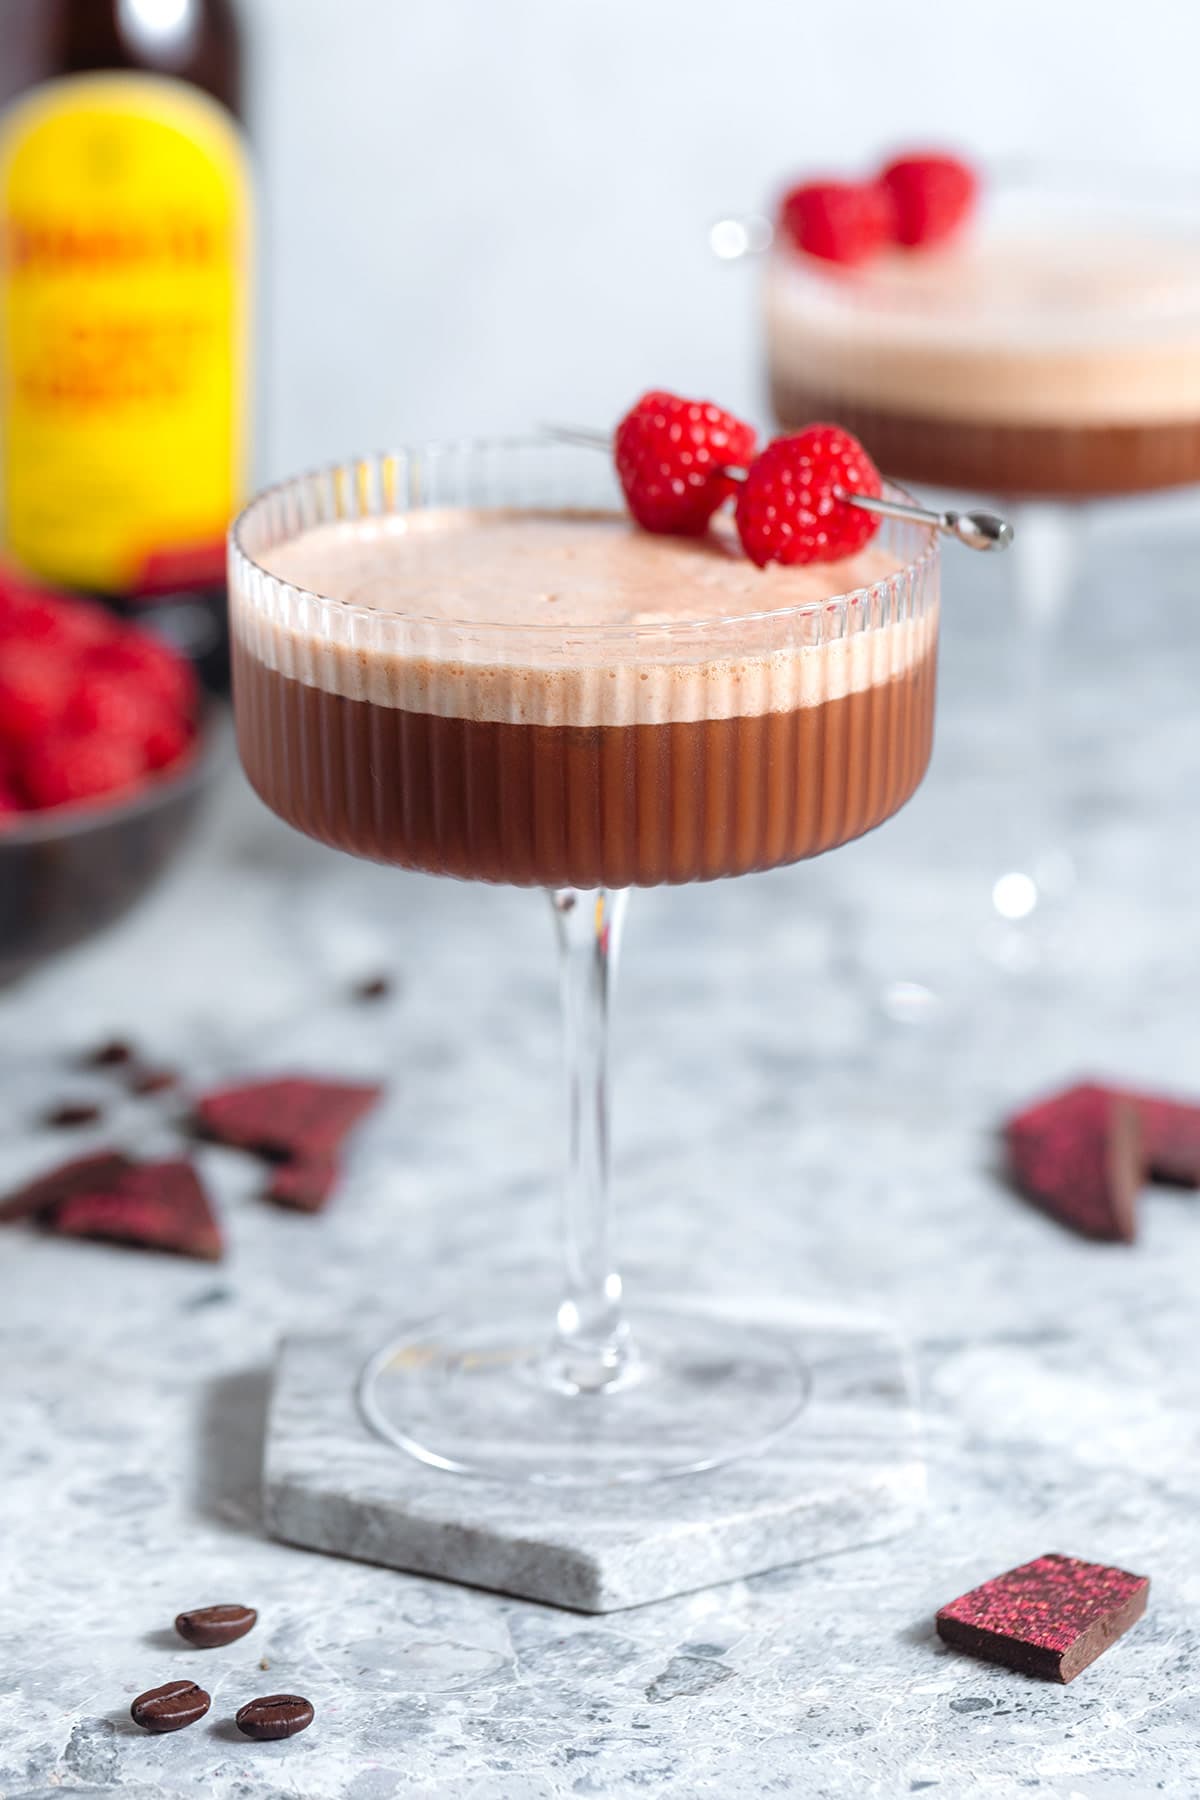 A chocolate espresso martini with rich foam on top in a coupe glass garnished with three coffee beans and a cocktail pick with two raspberries on a grey background with another cocktail in the background.